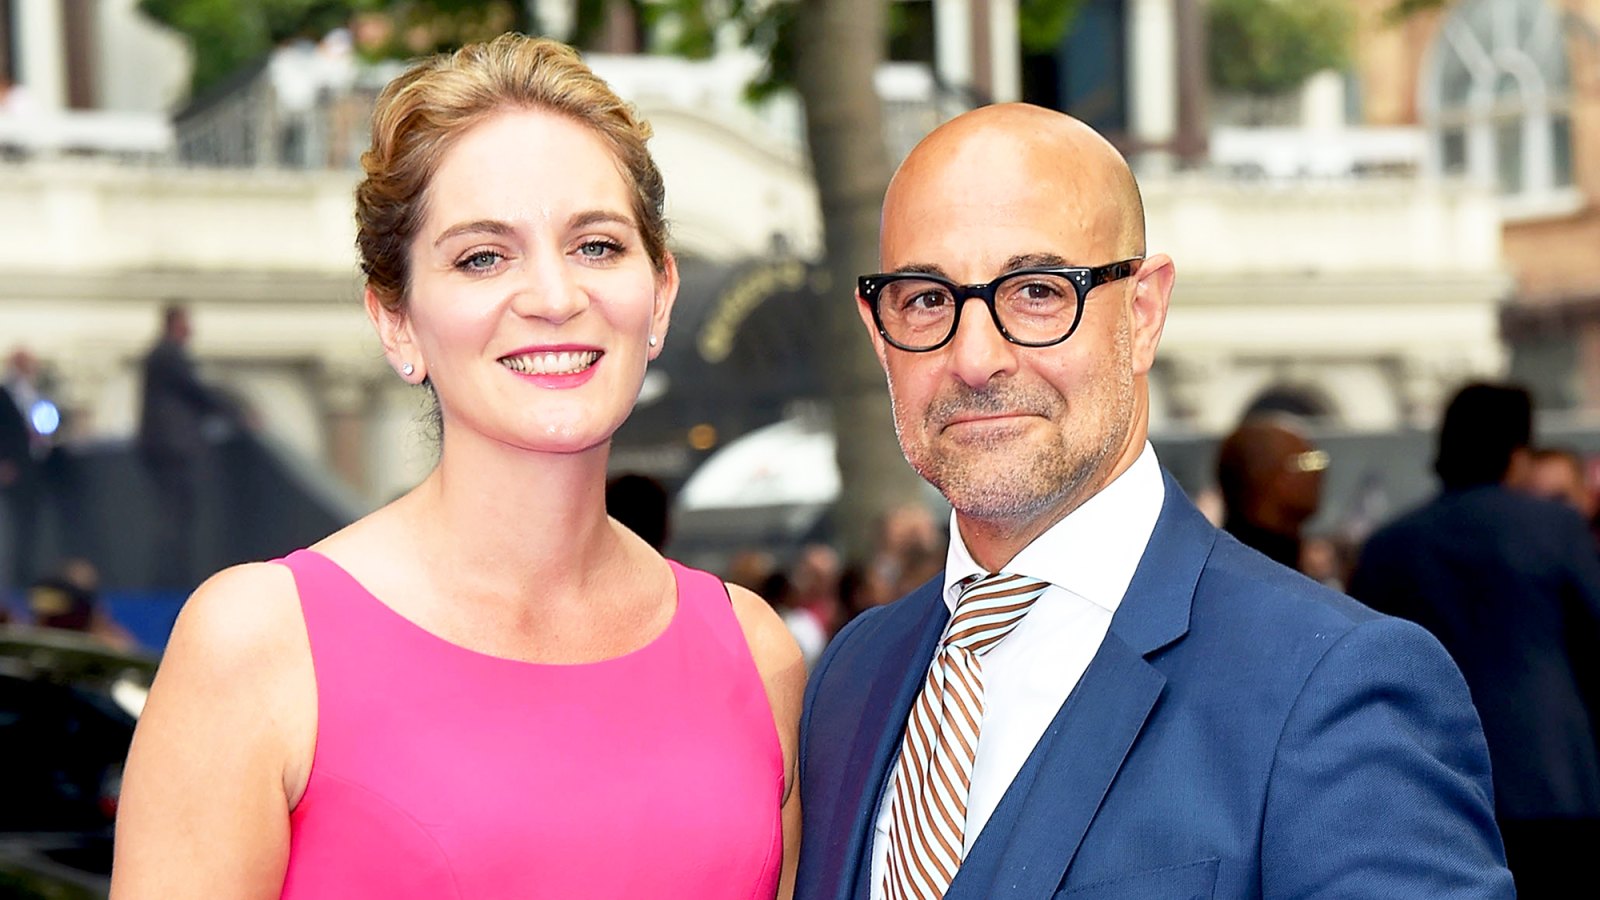 Stanley Tucci and Felicity Blunt attend the global 2017 premiere of "Transformers: The Last Knight" at Cineworld Leicester Square in London, England.